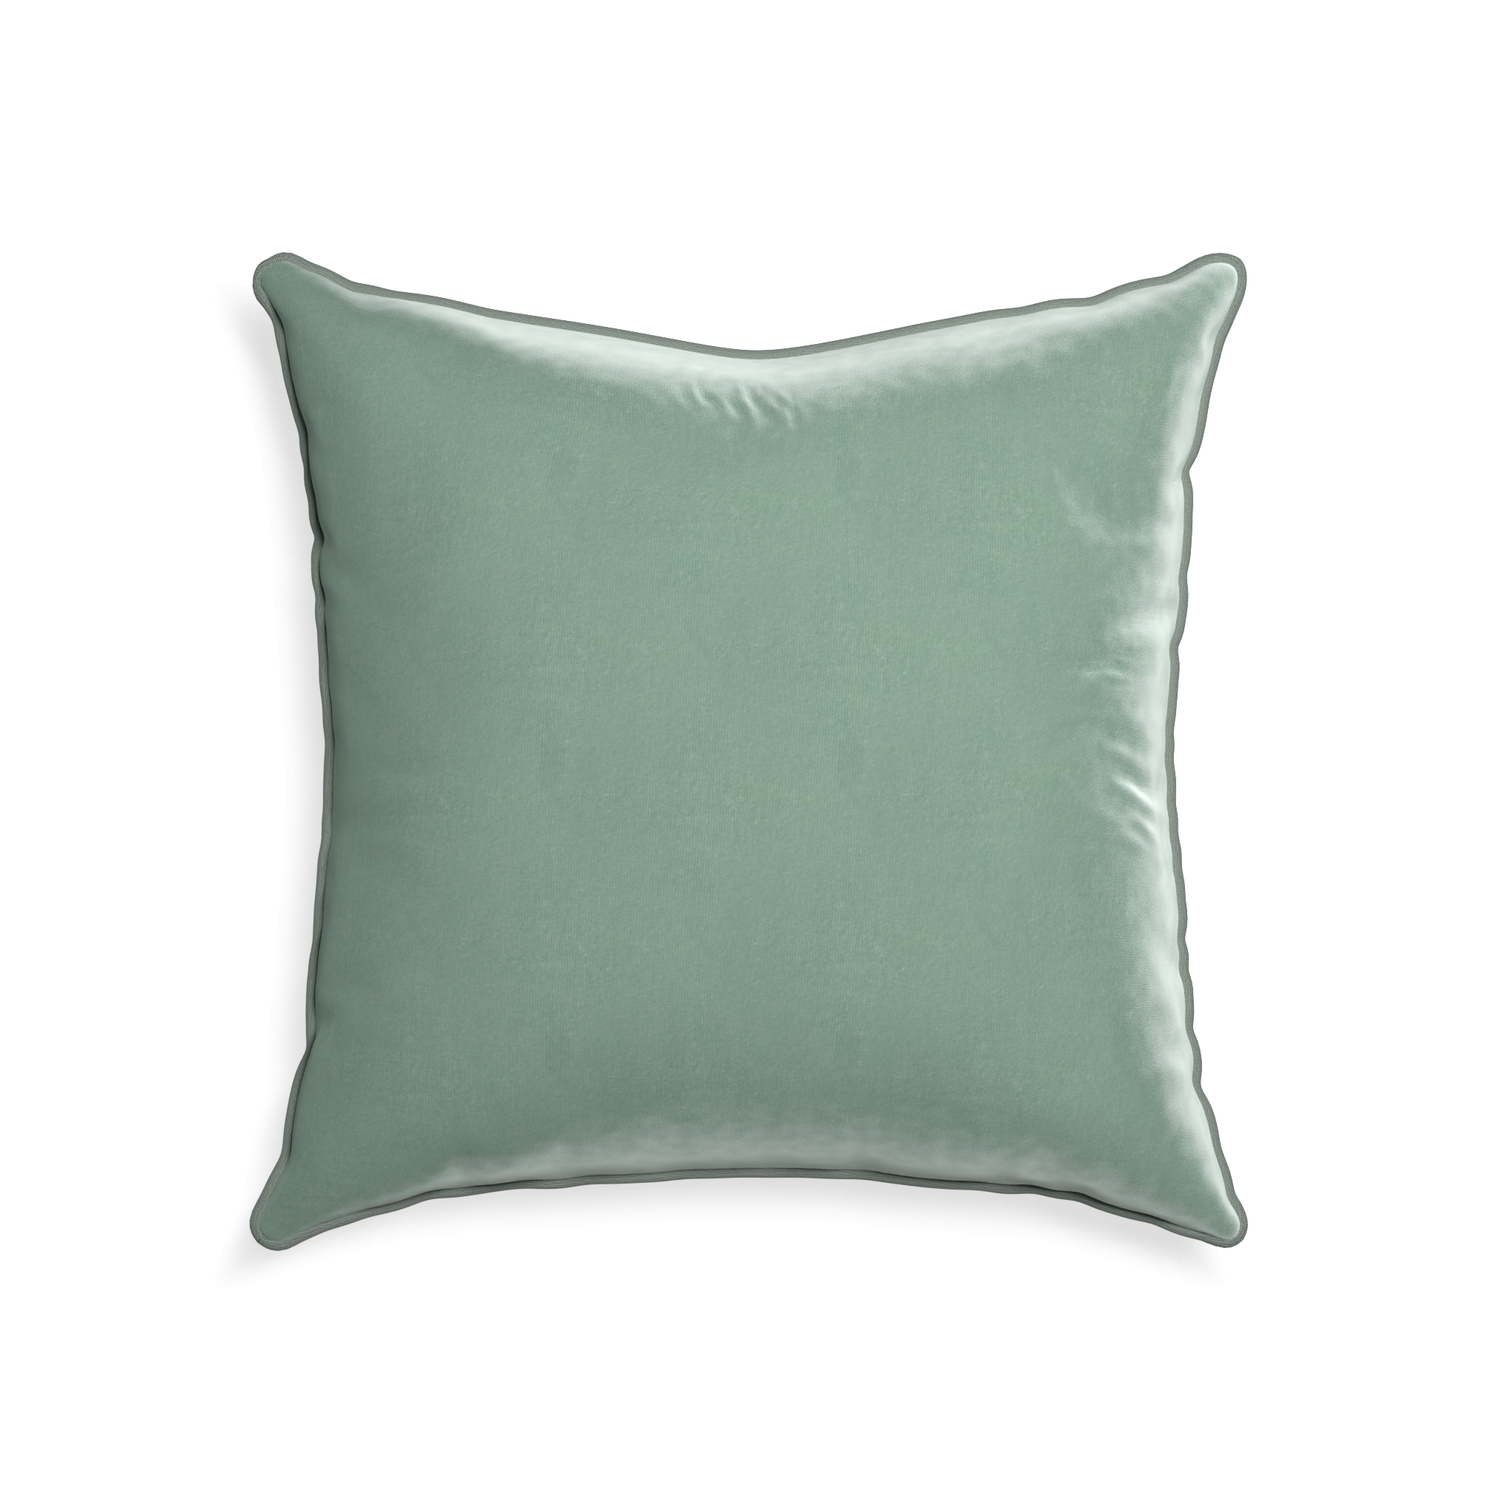 22-square sea salt velvet custom blue greenpillow with sage piping on white background